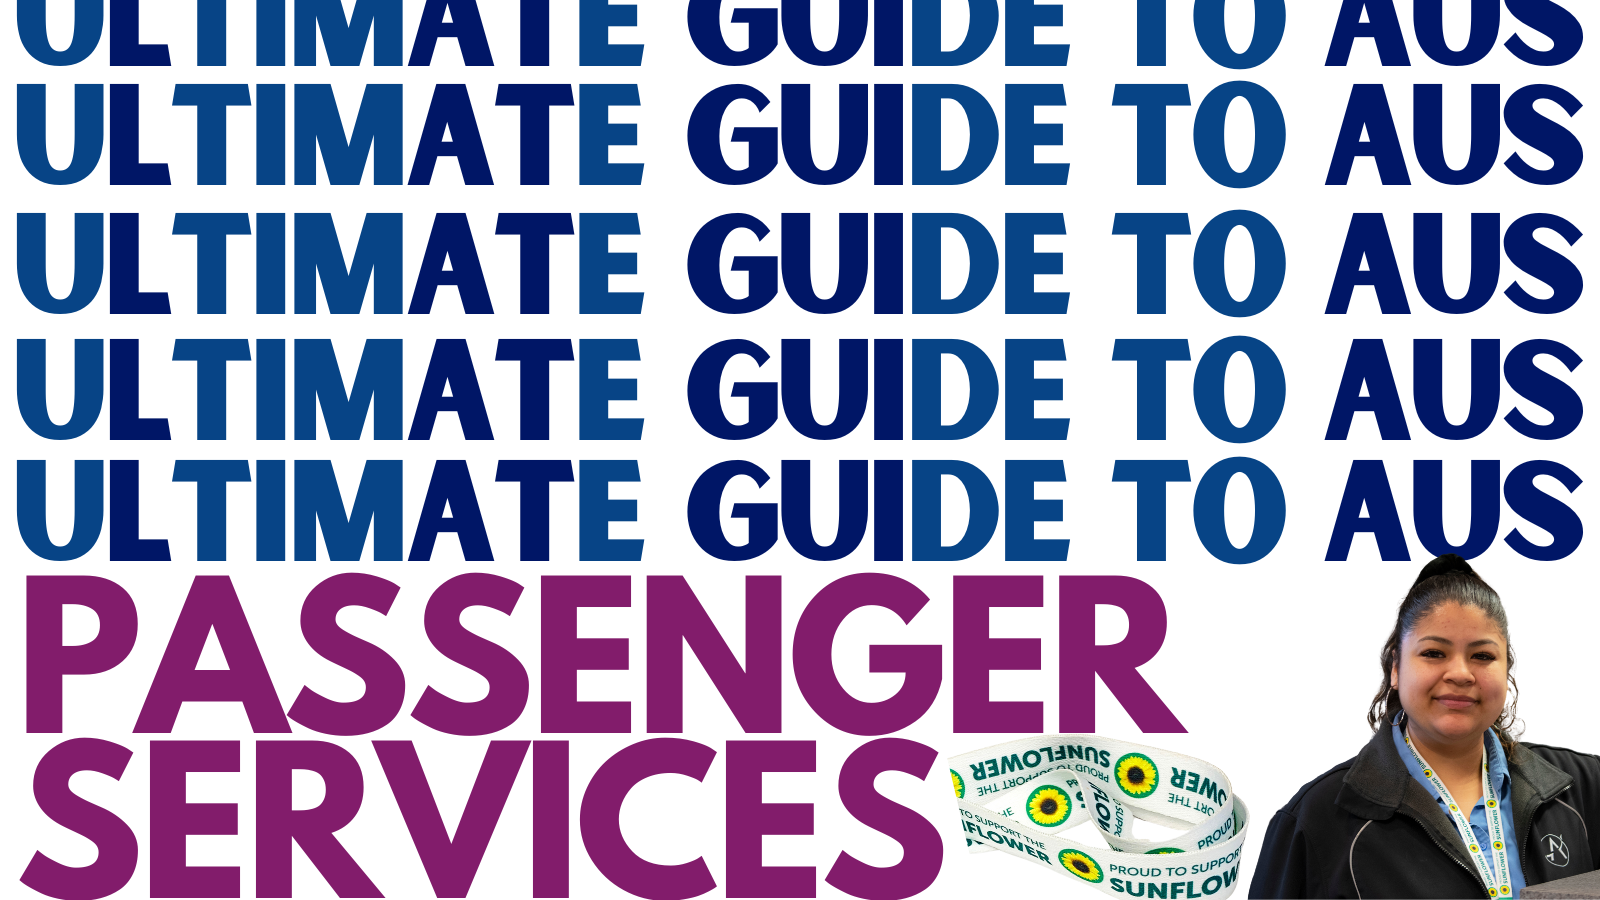 Text reads: Ultimate Guide to AUS - Passenger services. There's a photo of an AUS customer service rep and a sunflower lanyard.